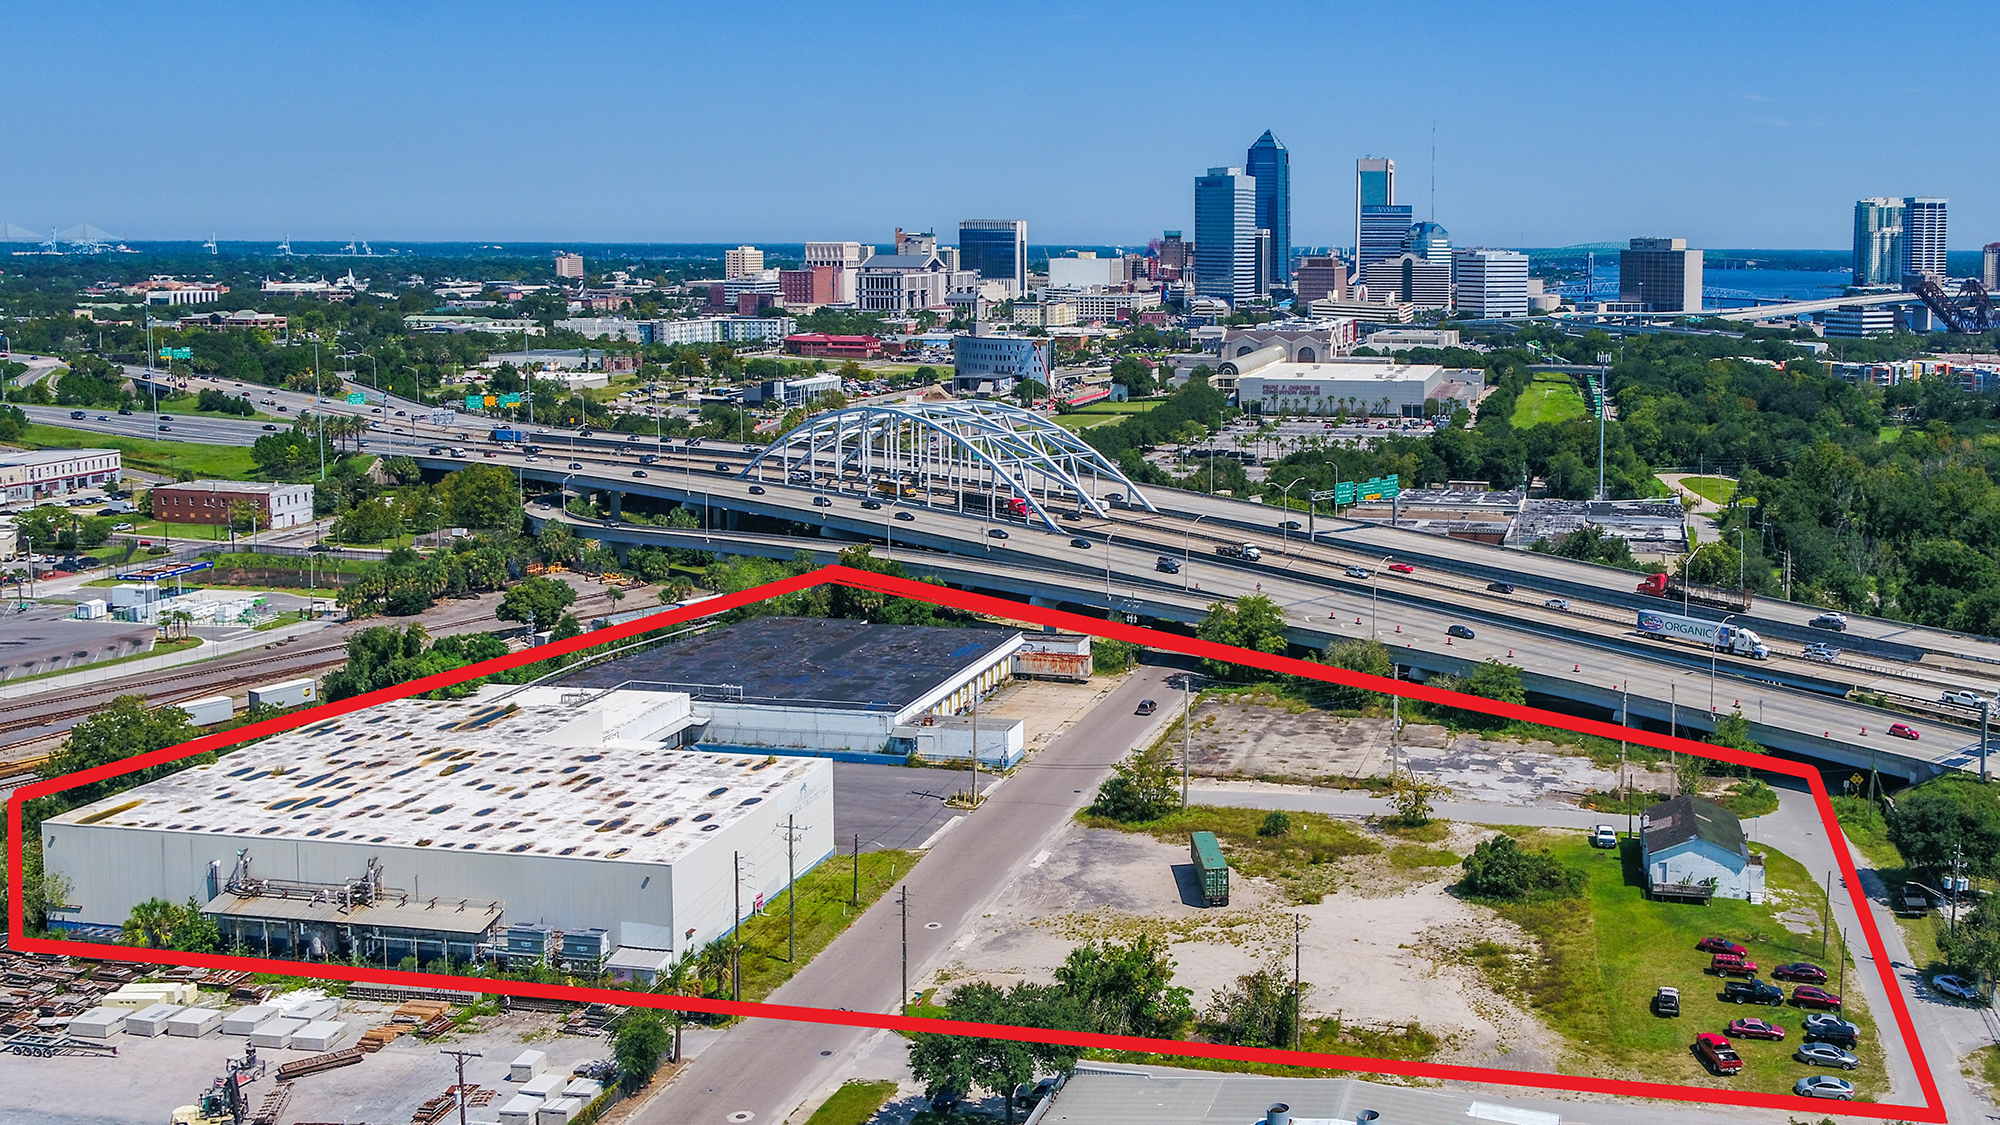 Dennis + Ives is the redevelopment of the former Caribbean Cold Storage property in the industrial district west of Interstate 95 and Downtown.